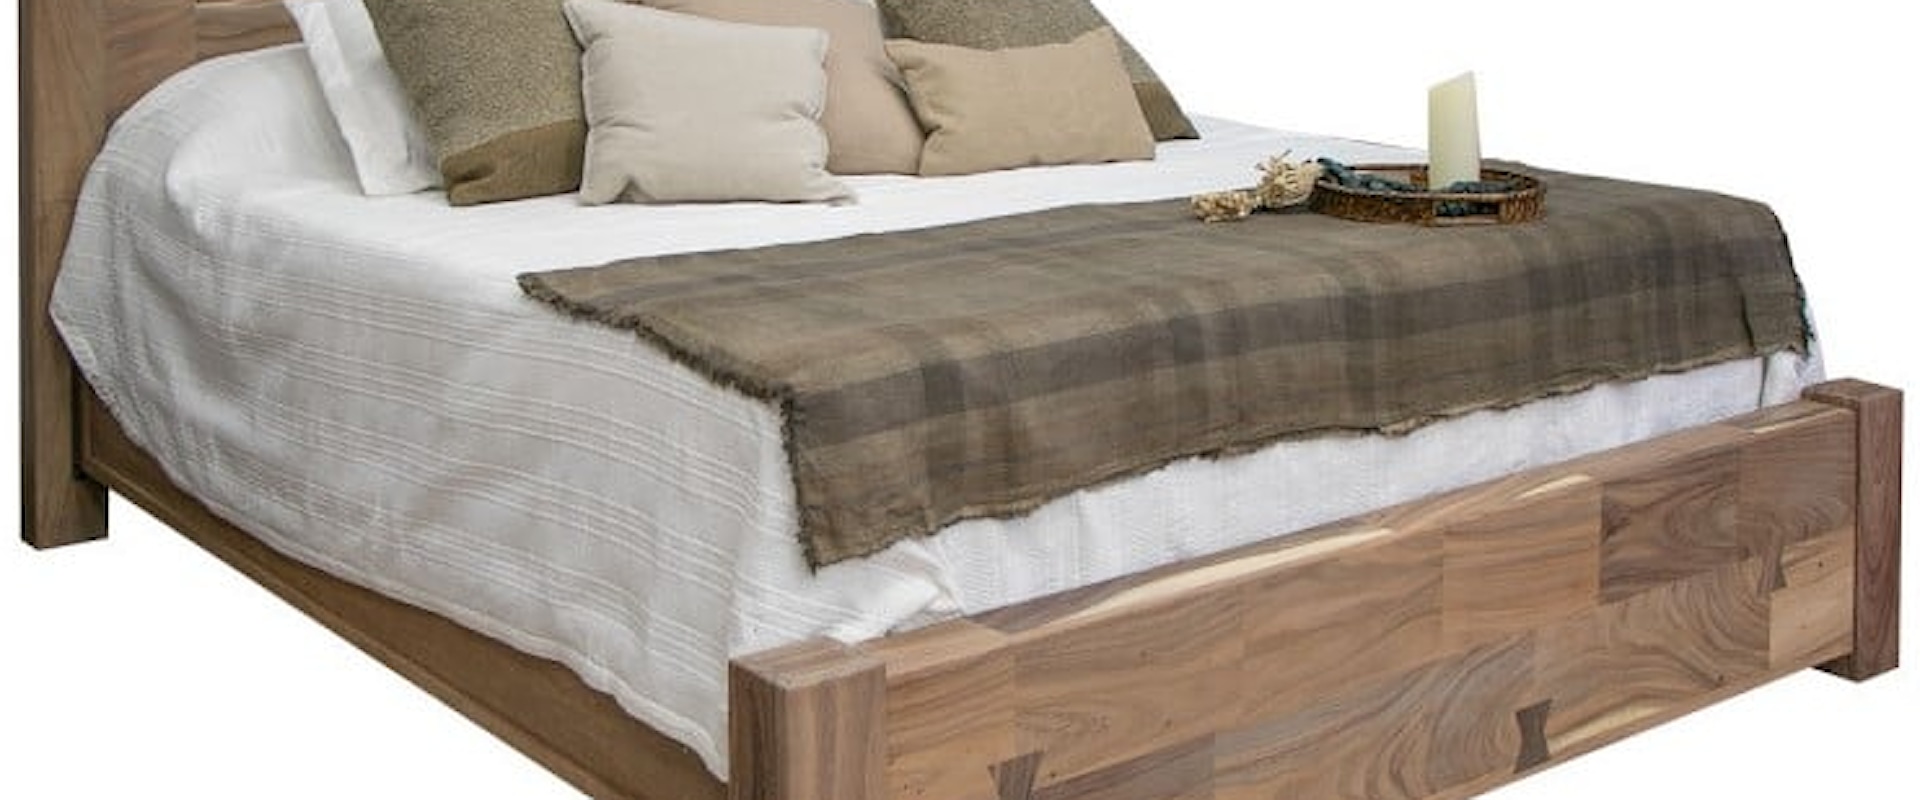 Transitional Queen Bed Set